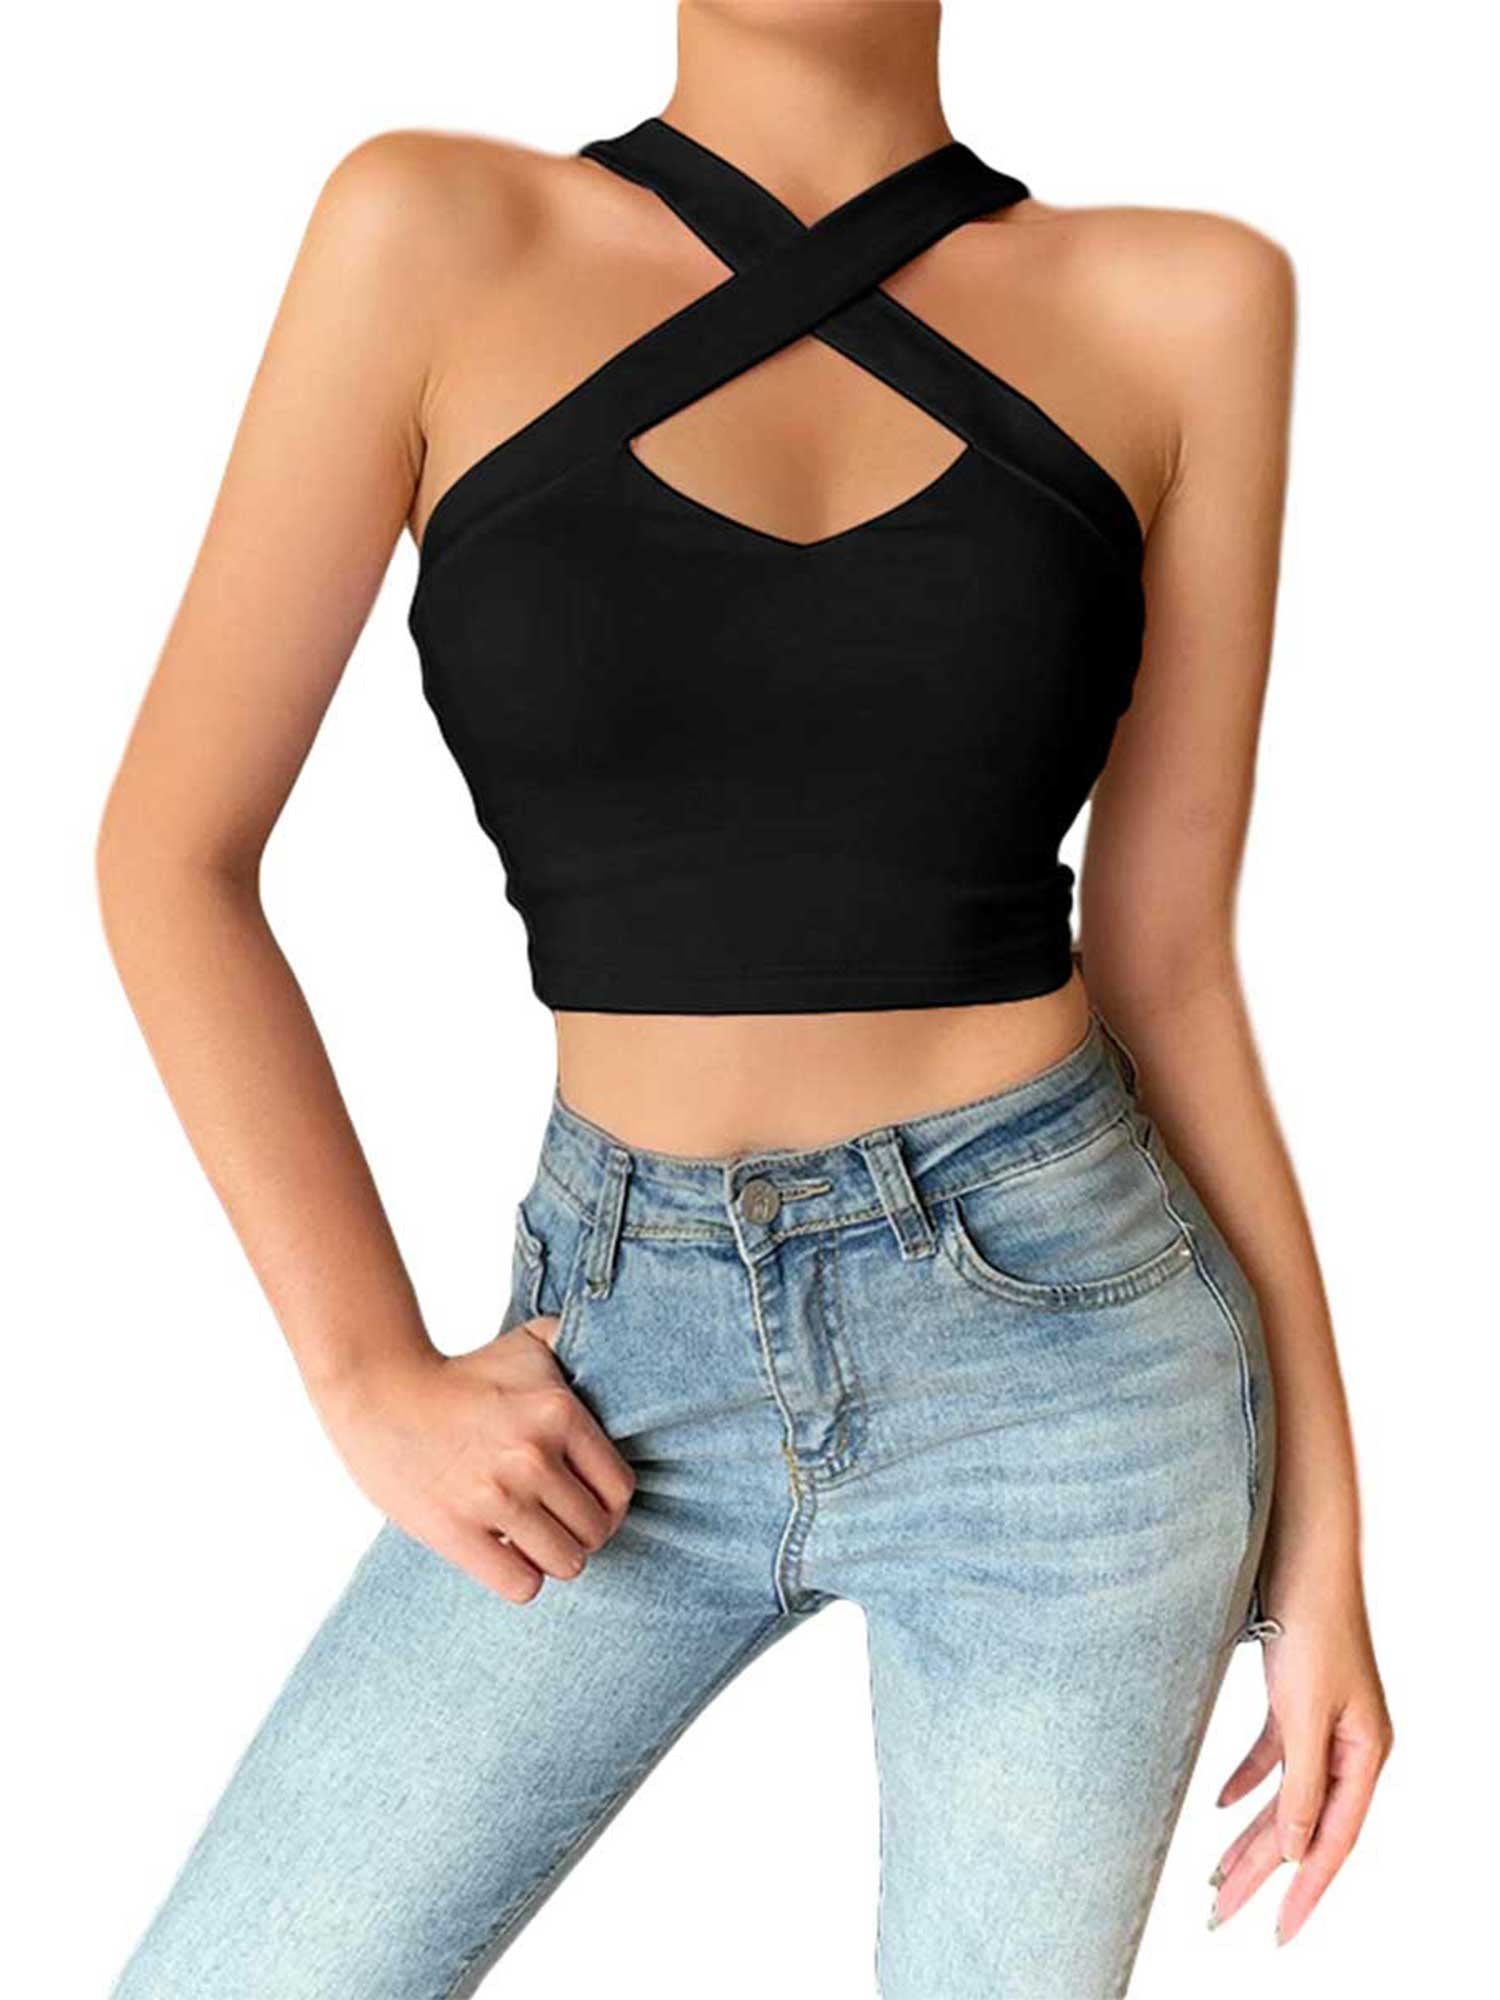 Kiapeise Ladies Summer Sexy Crop Top, Fashionable Solid Color Hanging Short Camisole Hollow Slim Midriff-baring Vest for Dating - Walmart.com